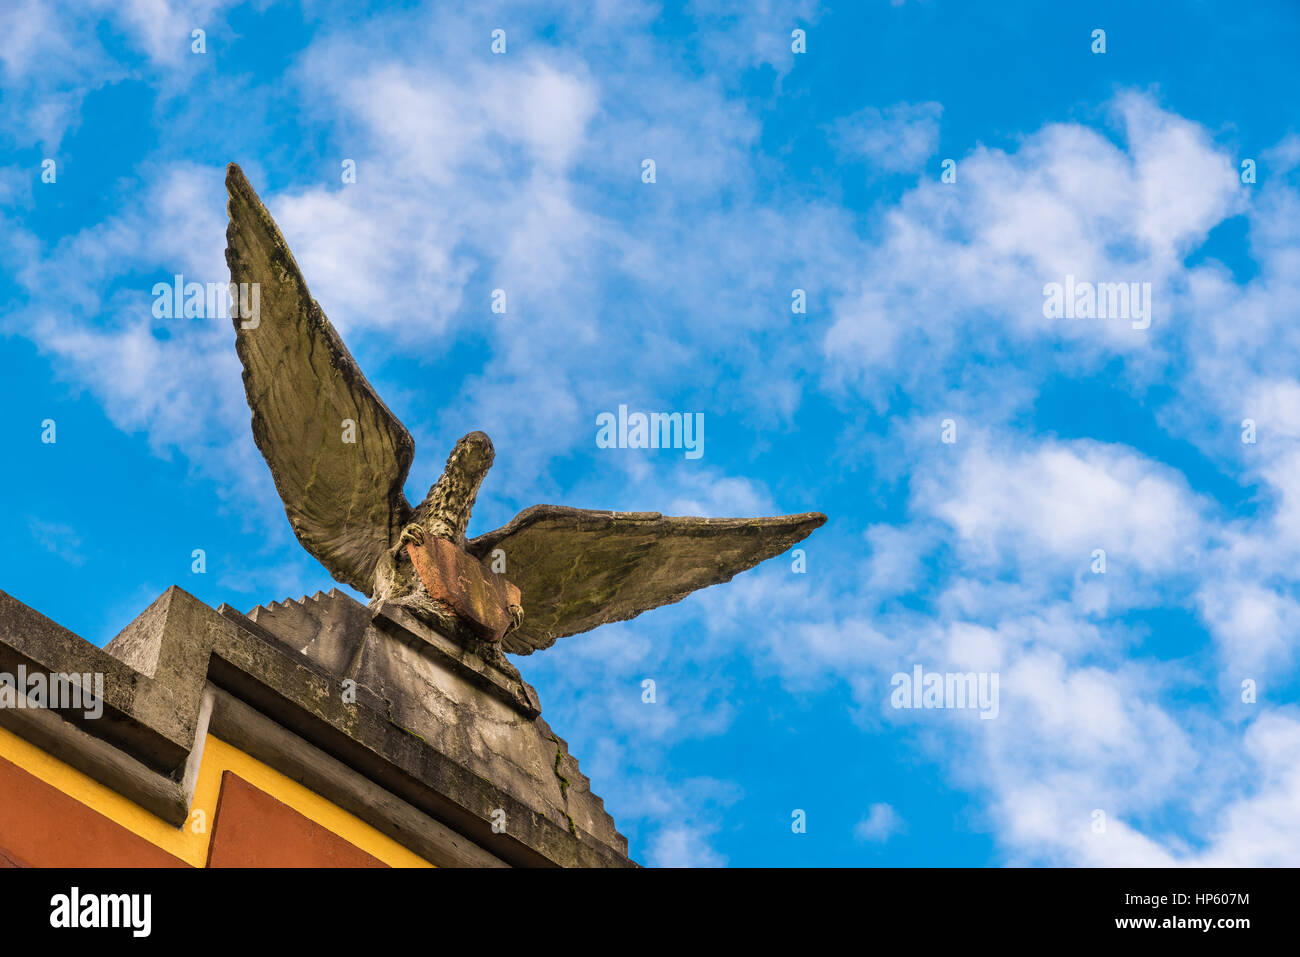 Eagle of stone. Concept and symbol of force, freedom, control and power. Stock Photo